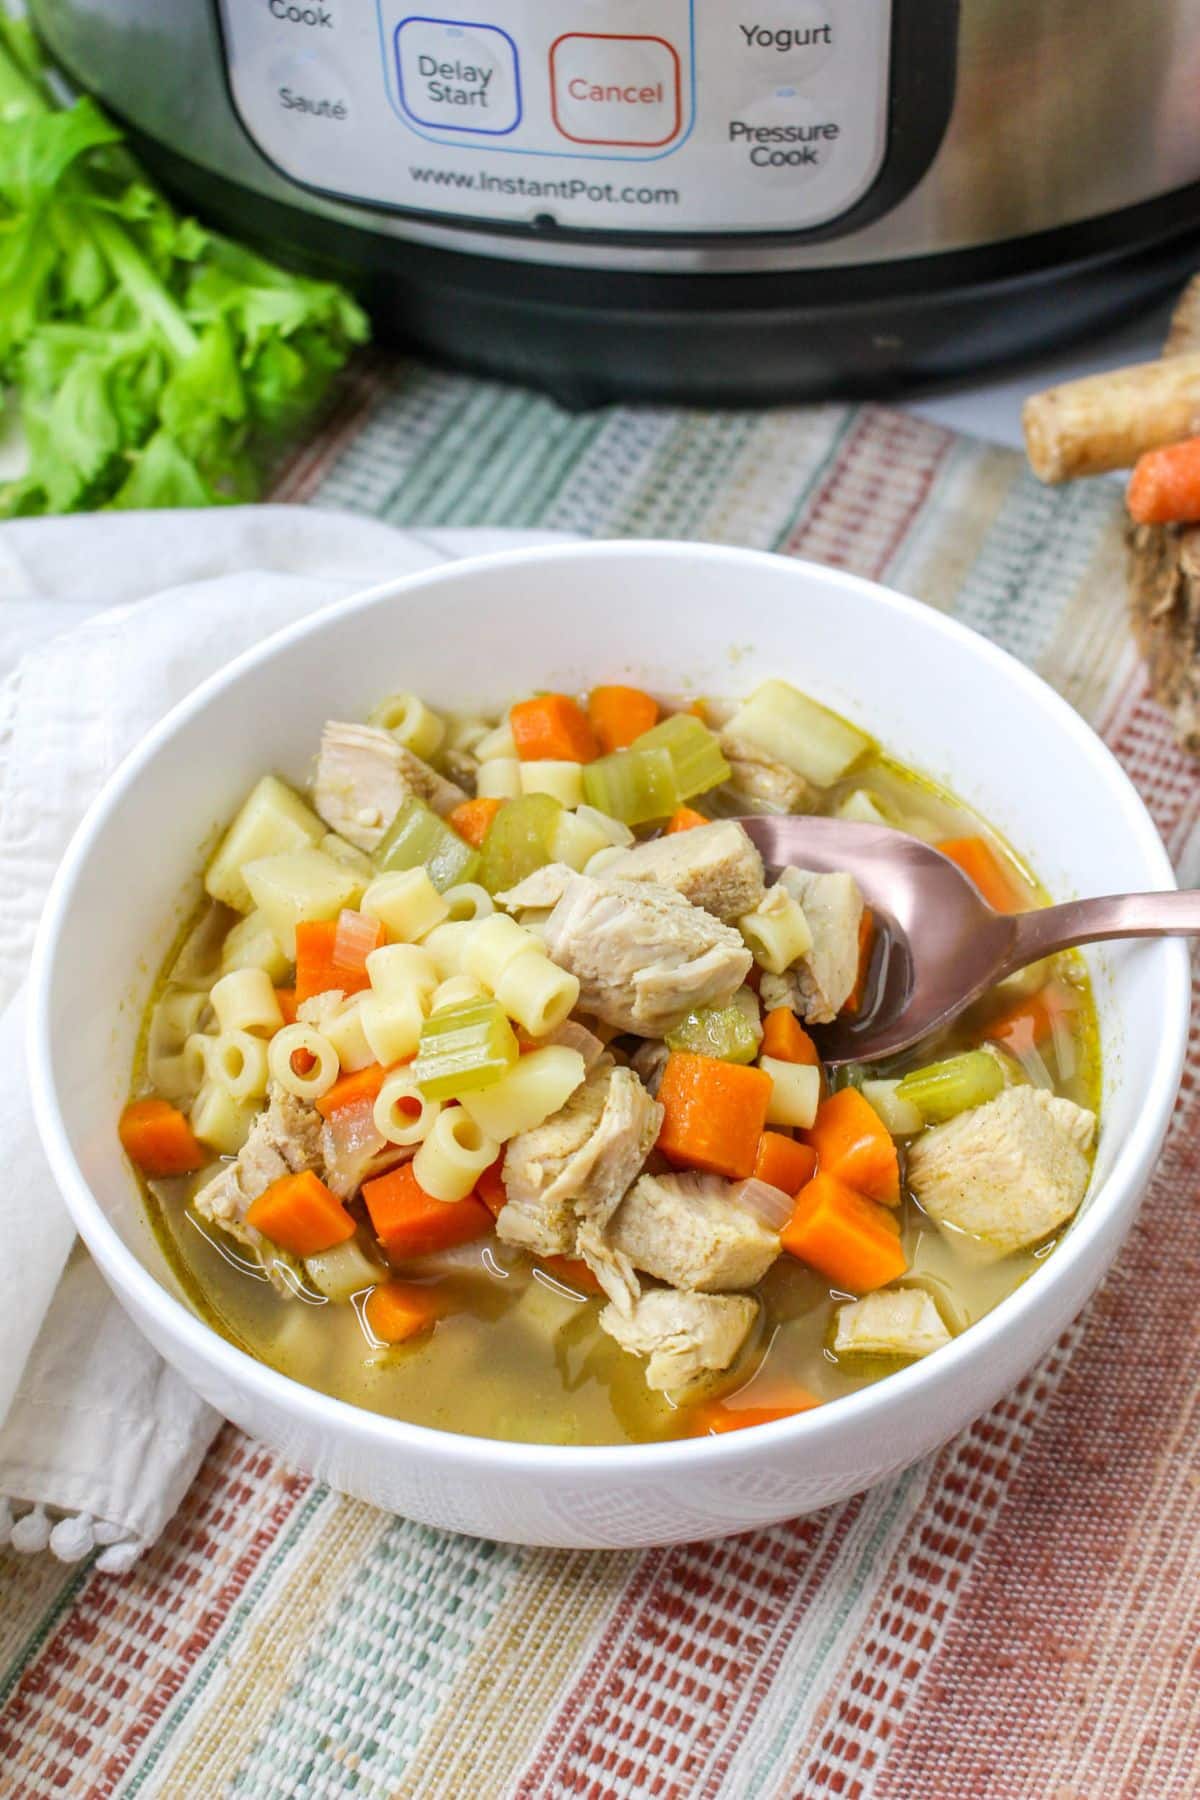 Instant Pot Turkey Soup in a white bowl with the pressure cooker in the background